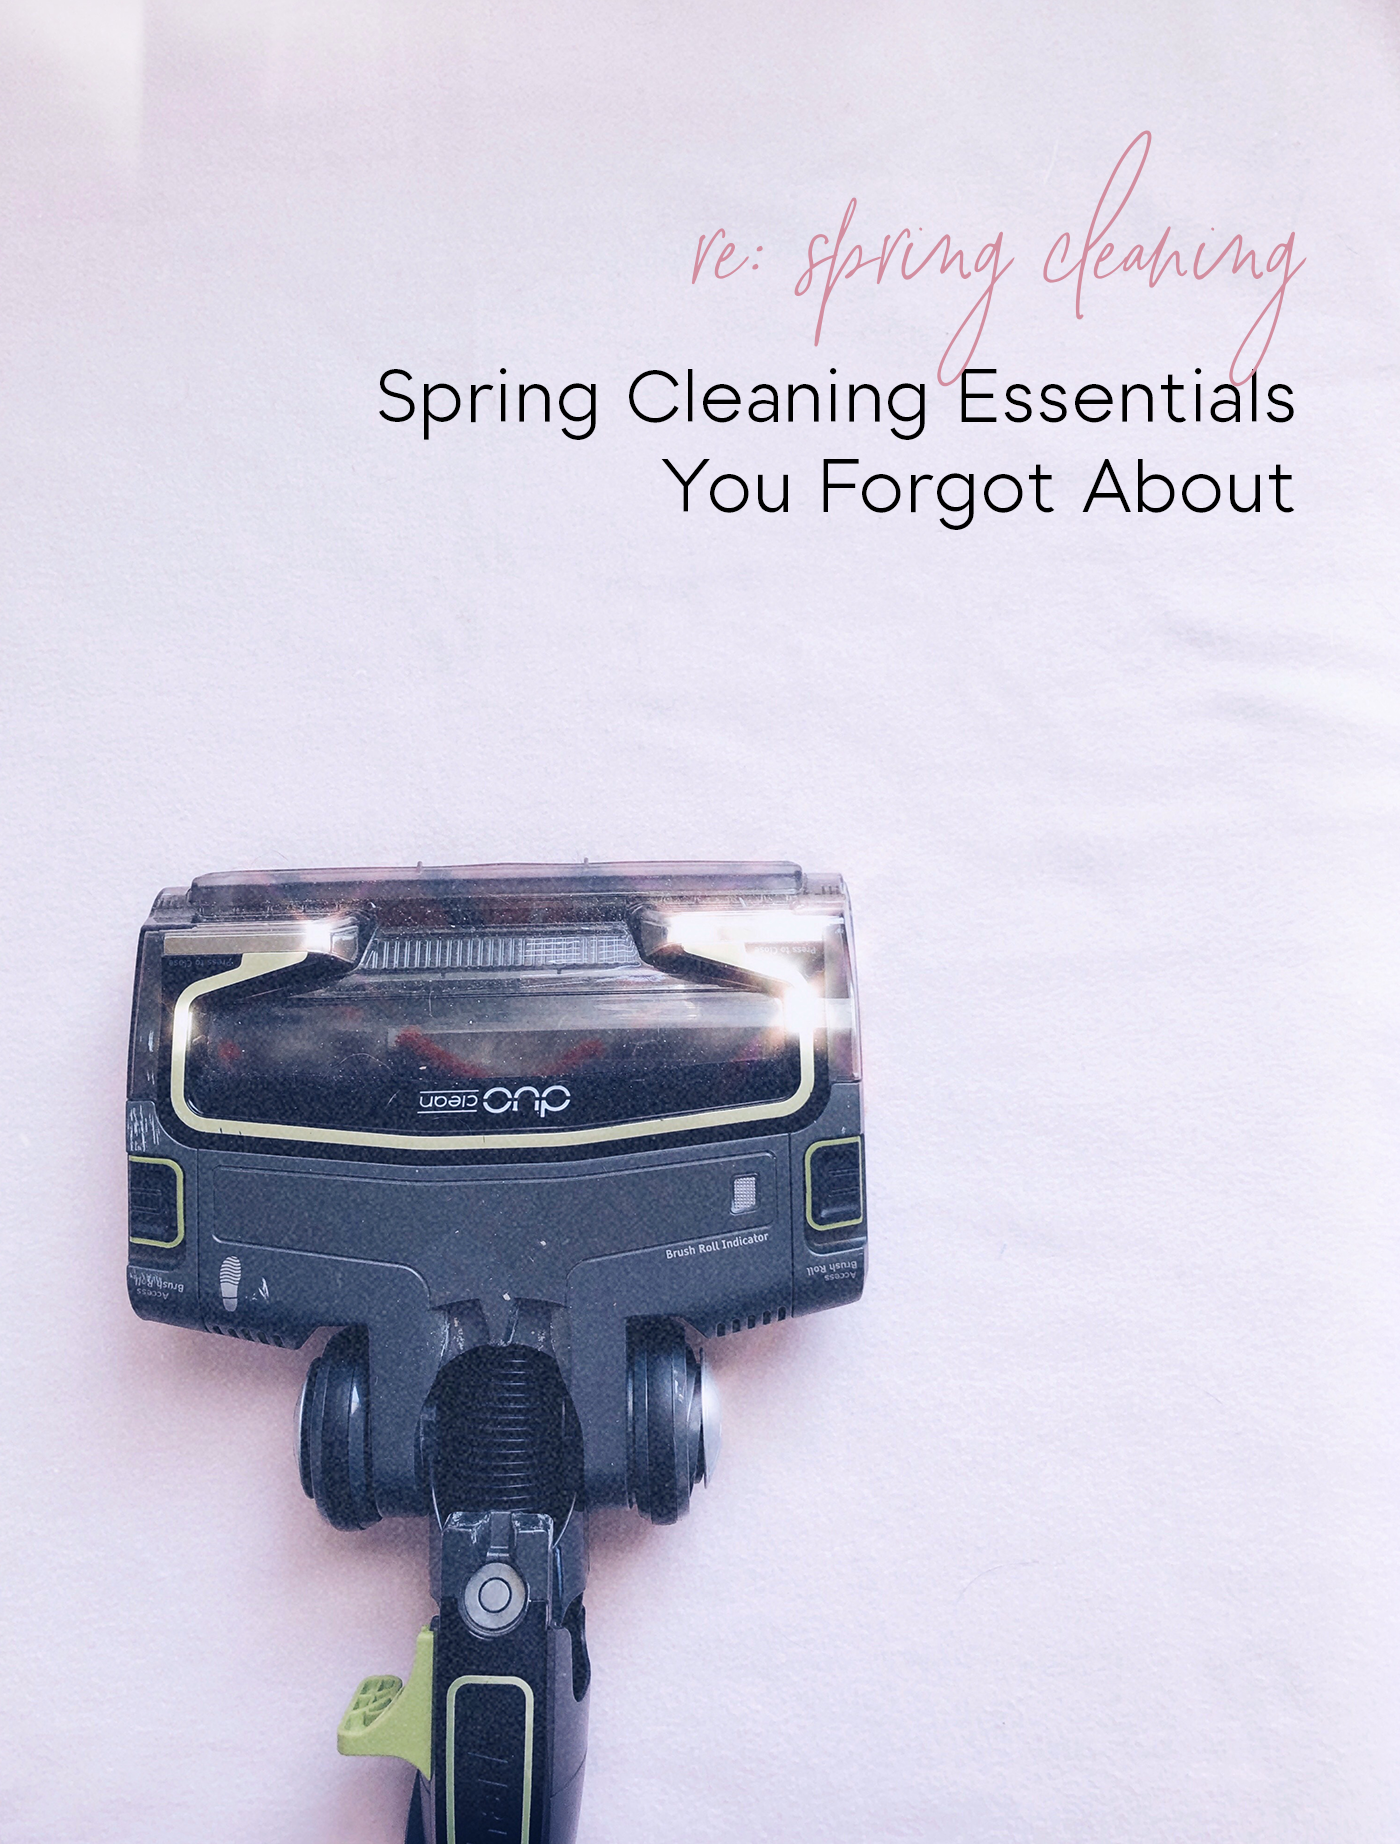 Spring Cleaning Essentials You Forgot About